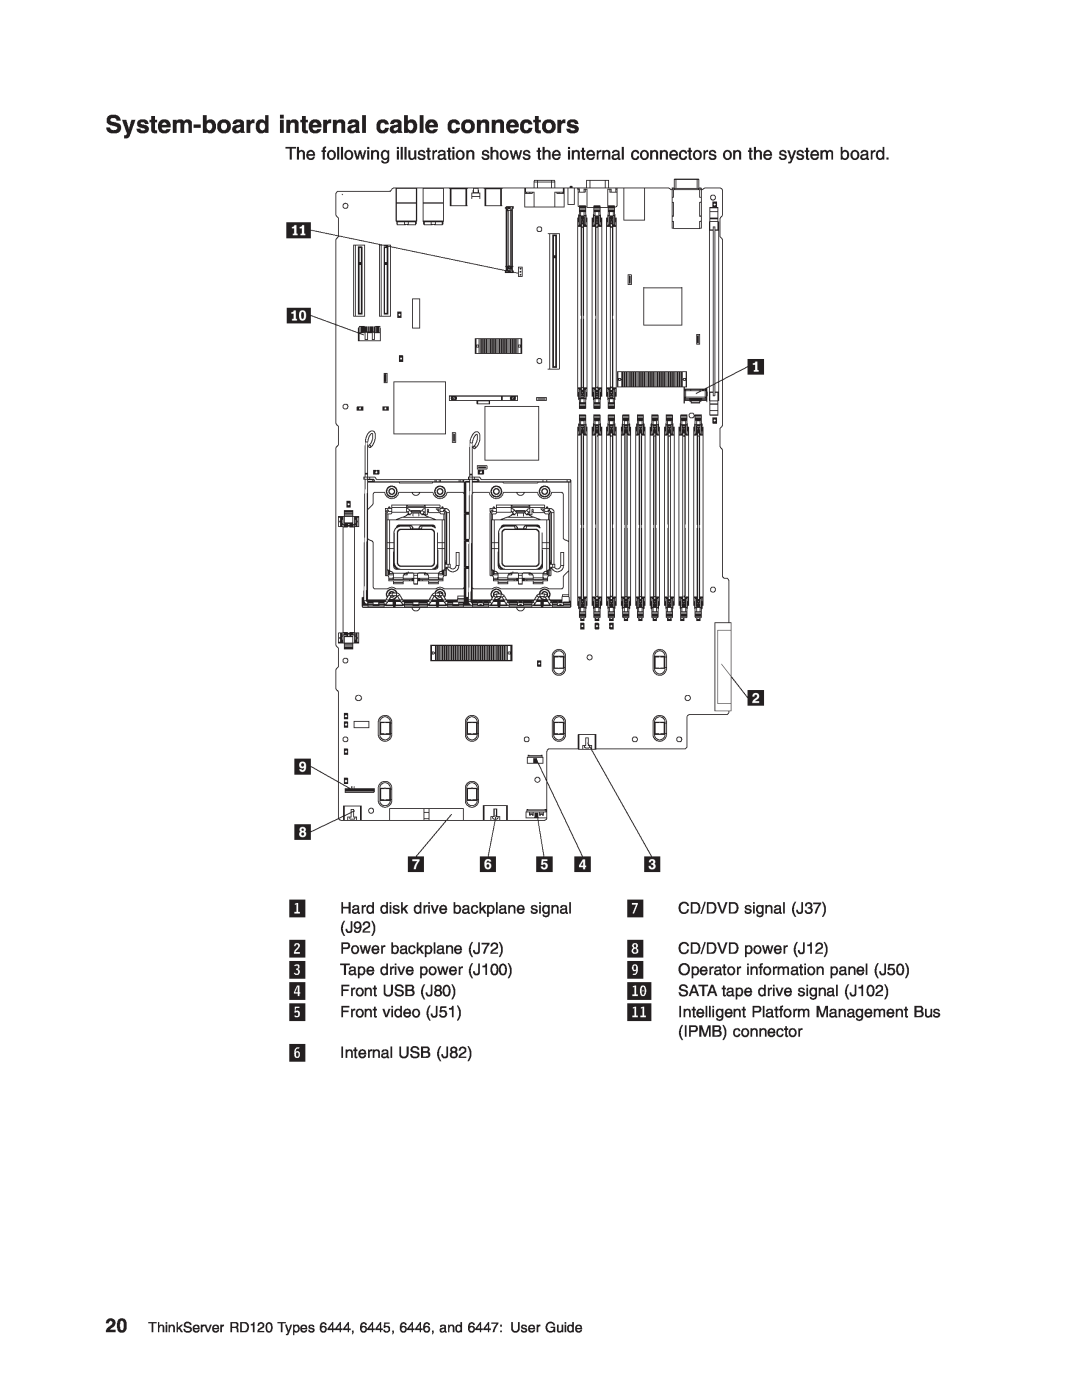 Lenovo RD120 manual System-boardinternal cable connectors 